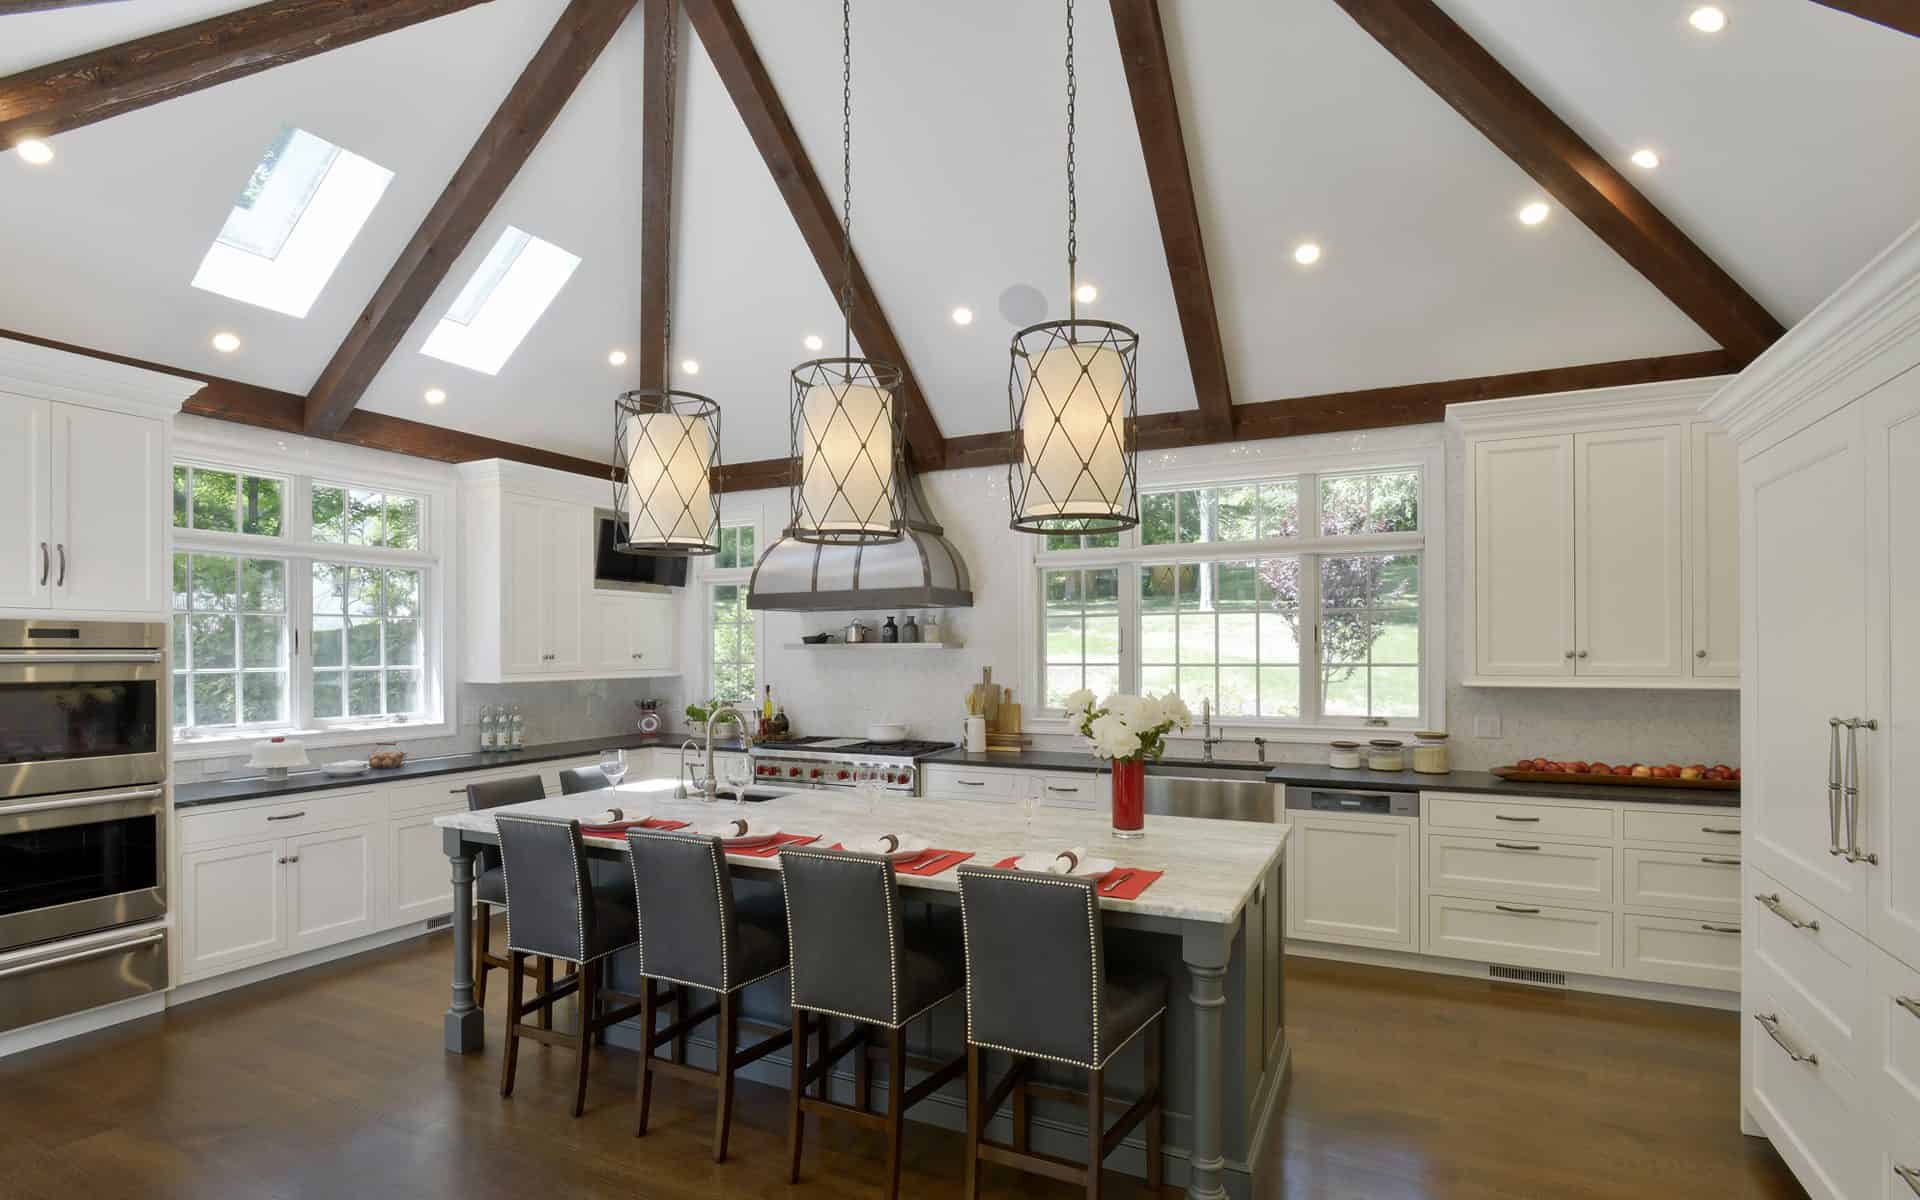 White classic kitchen features dark wood beams, custom marble-topped island, skylights and Bilotta cabinetry.